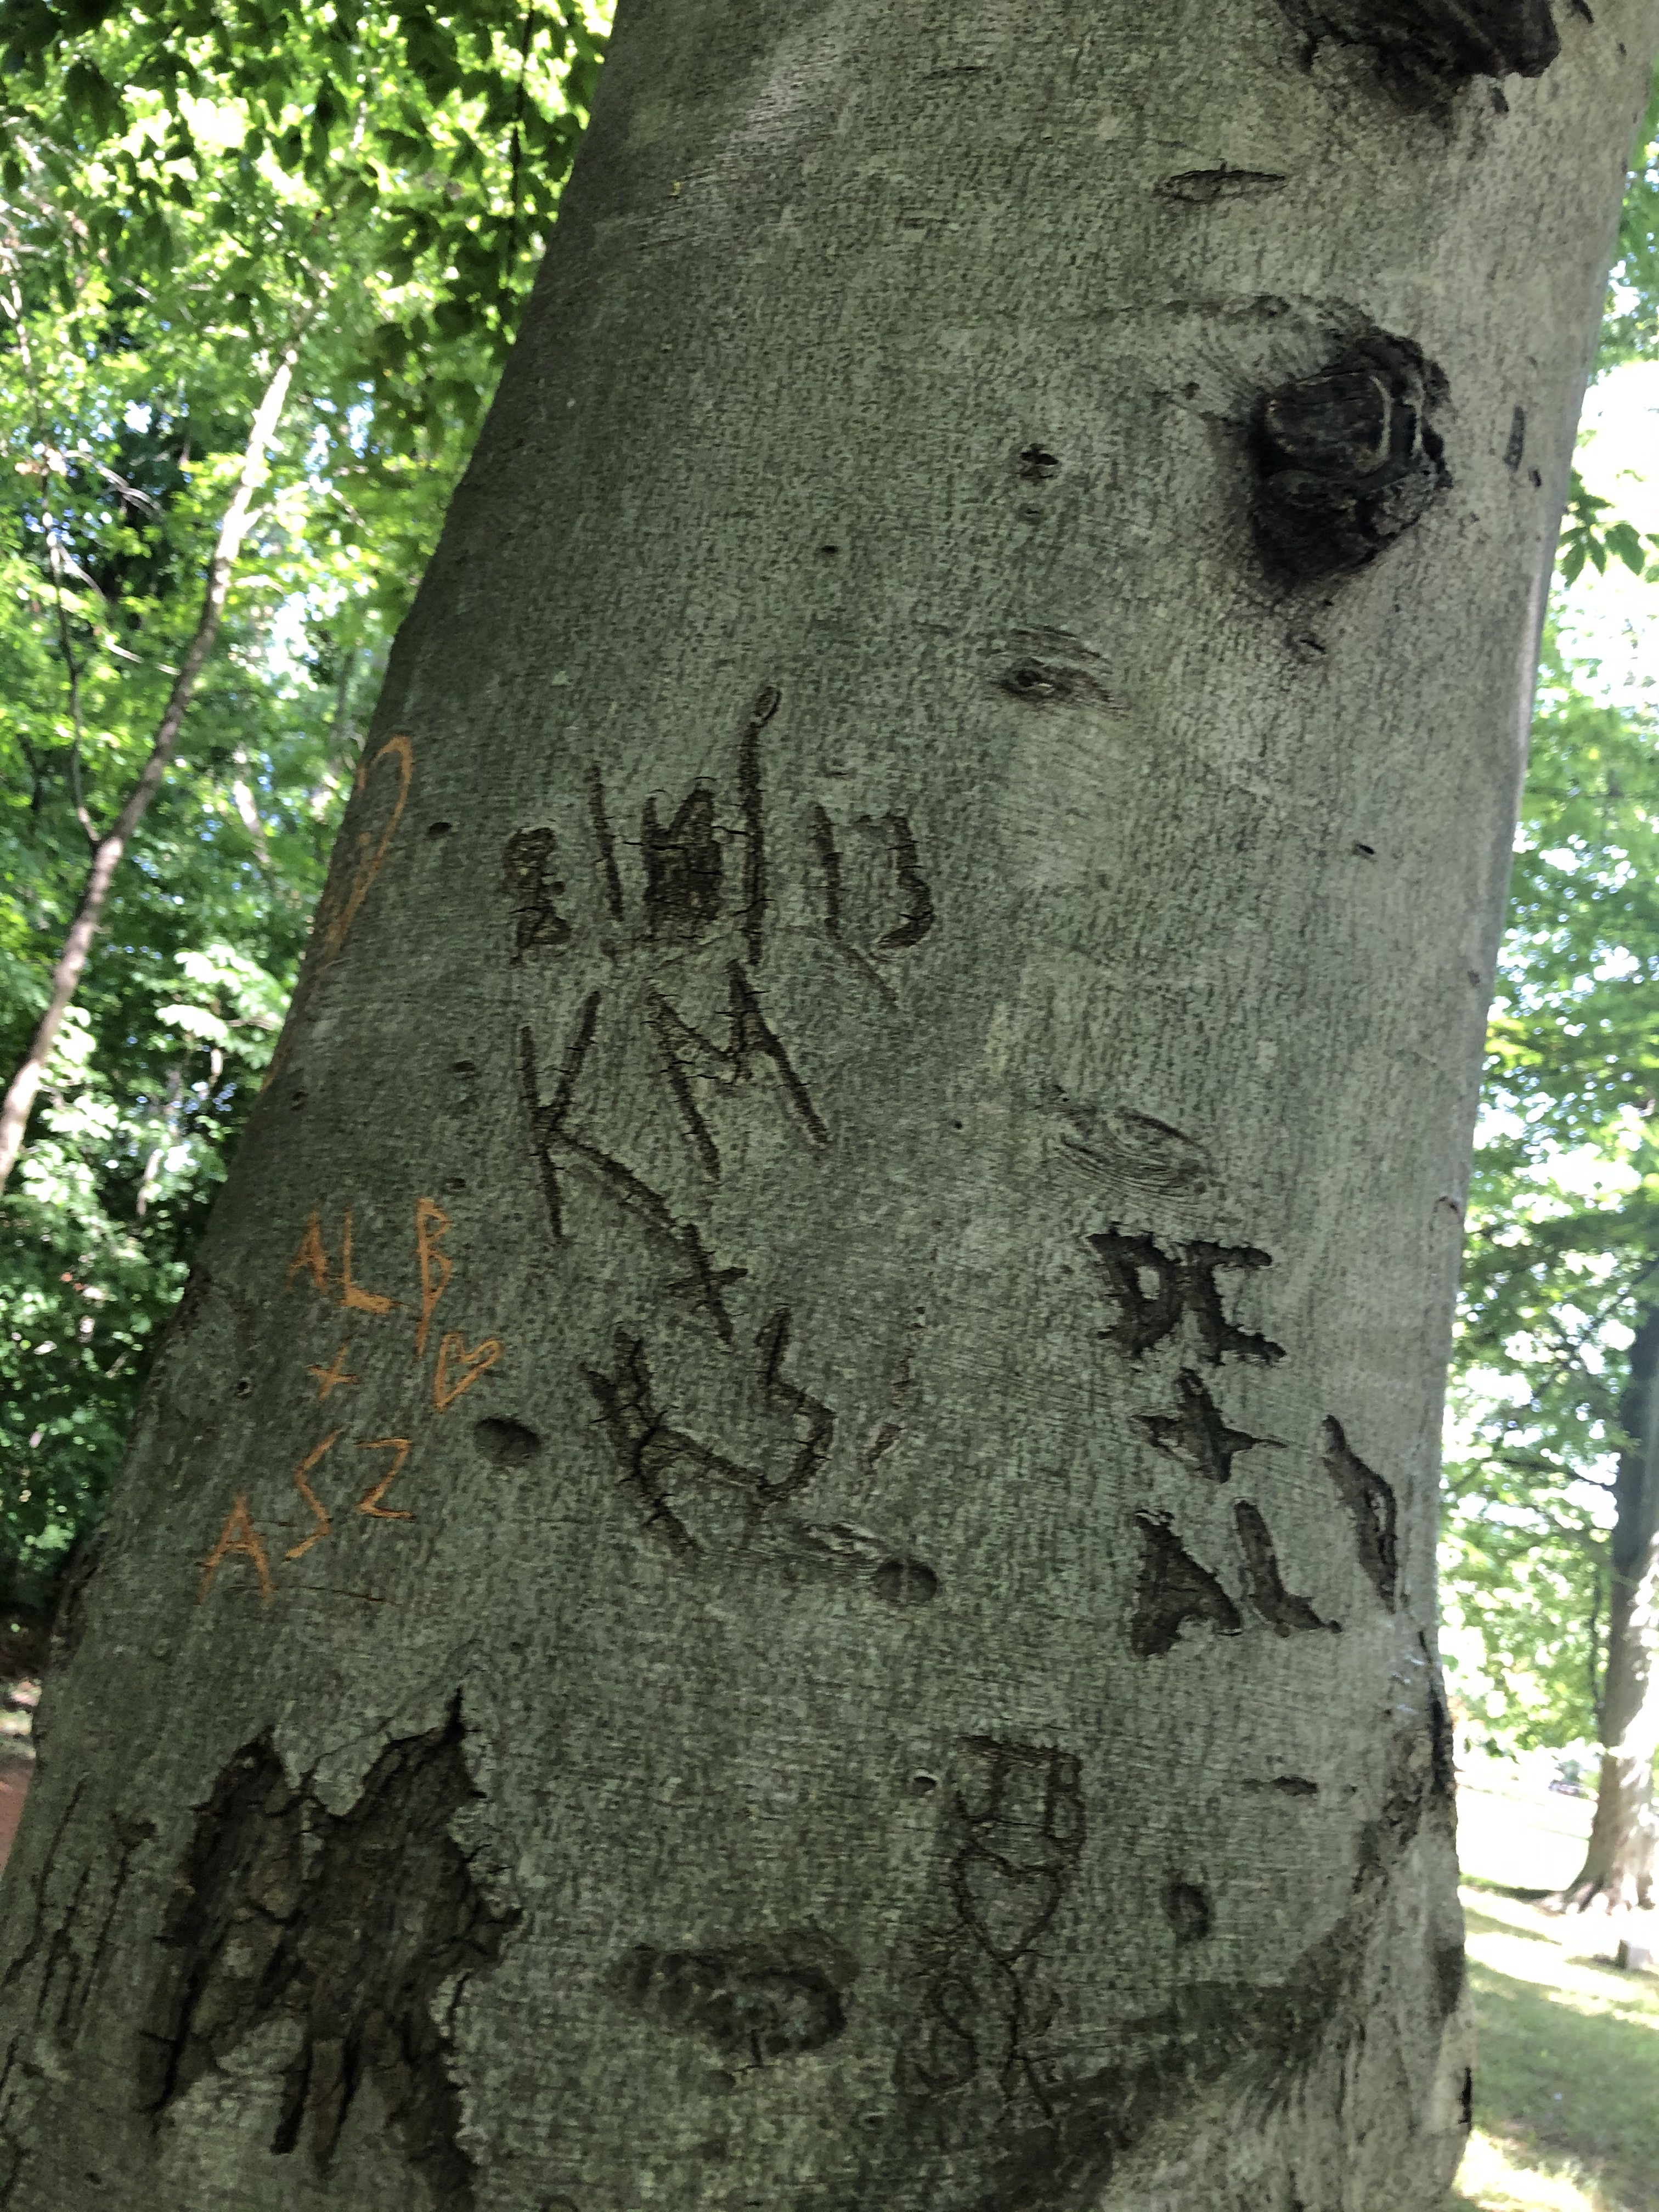 A tree found in Dunn's Woods